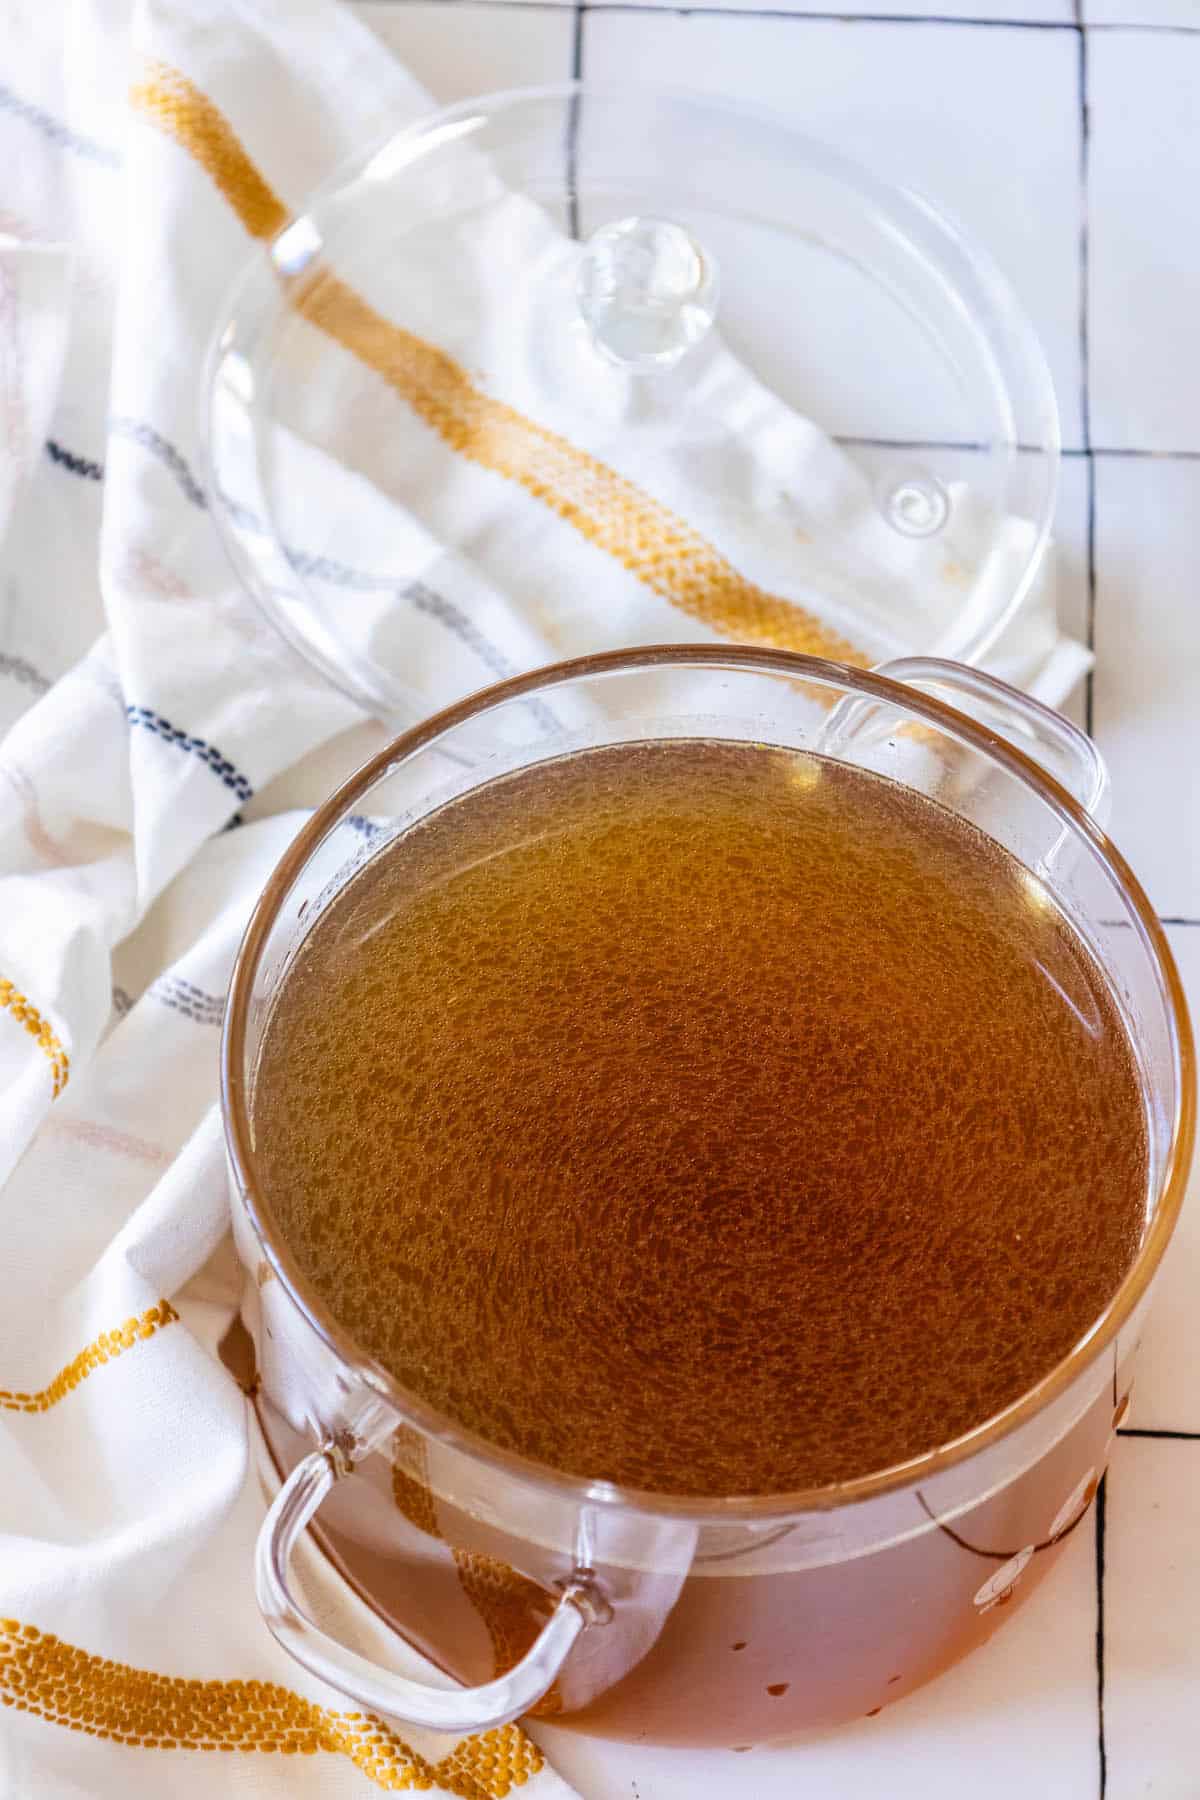 A bowl of brown gravy on a table with a towel.